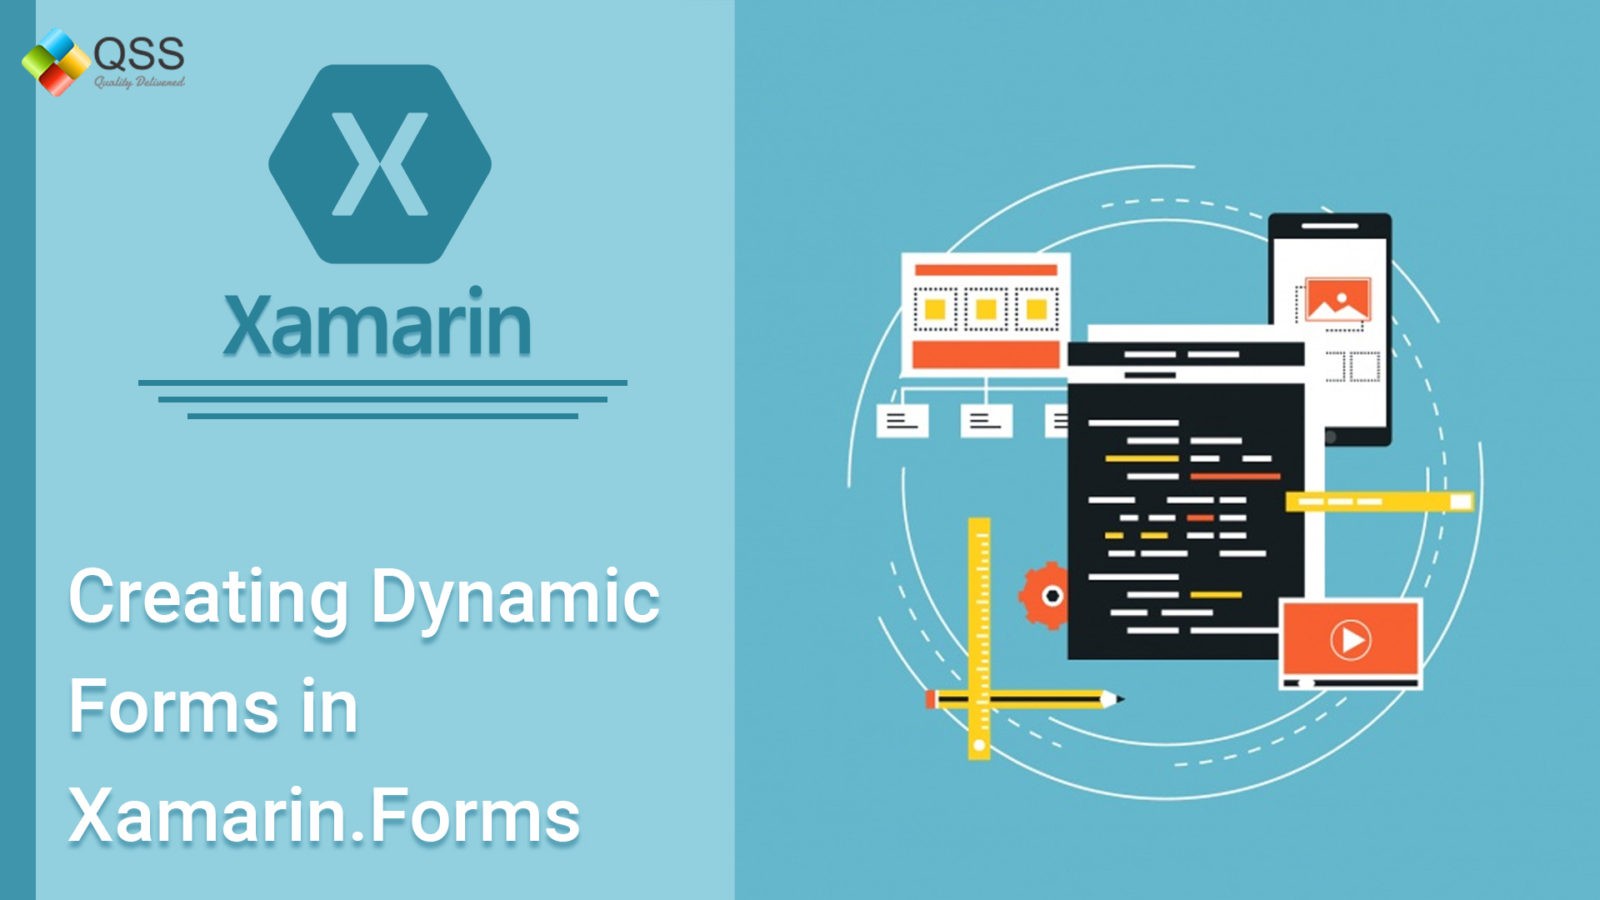 How to create Dynamic Forms in Xamarin.Forms?